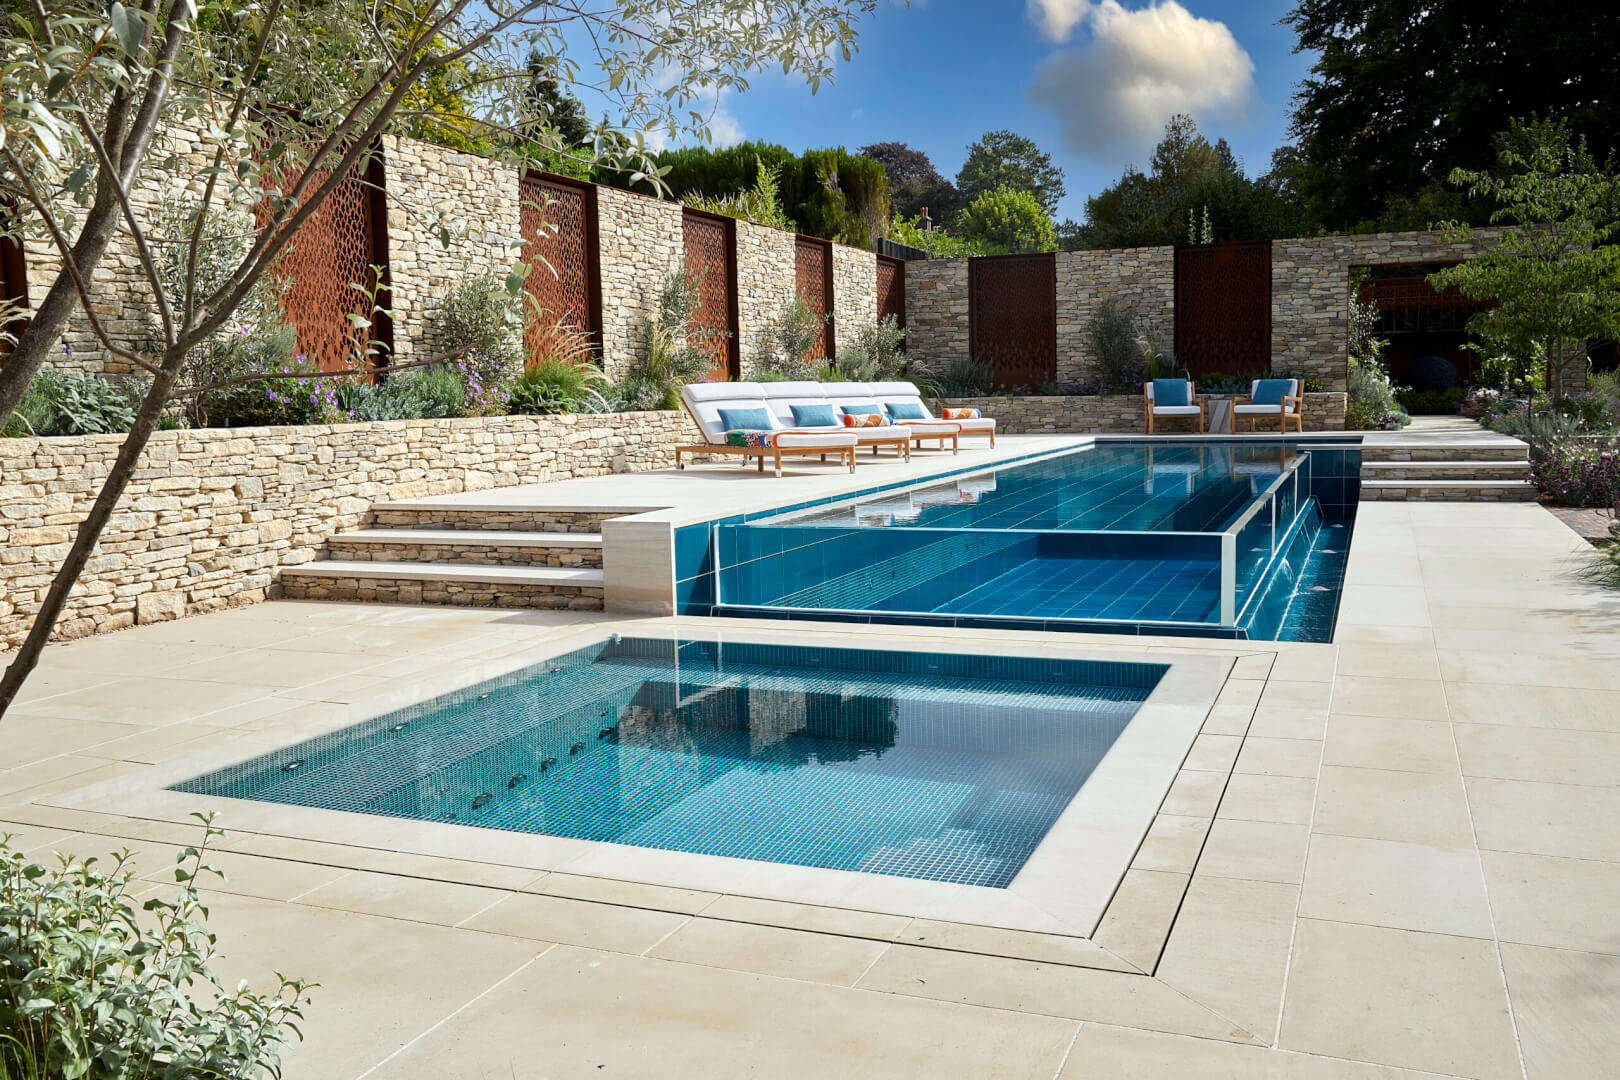 Be Inspired by this stunning Infinity Edge Swimming Pool and Vitality Pool at a Surrey home